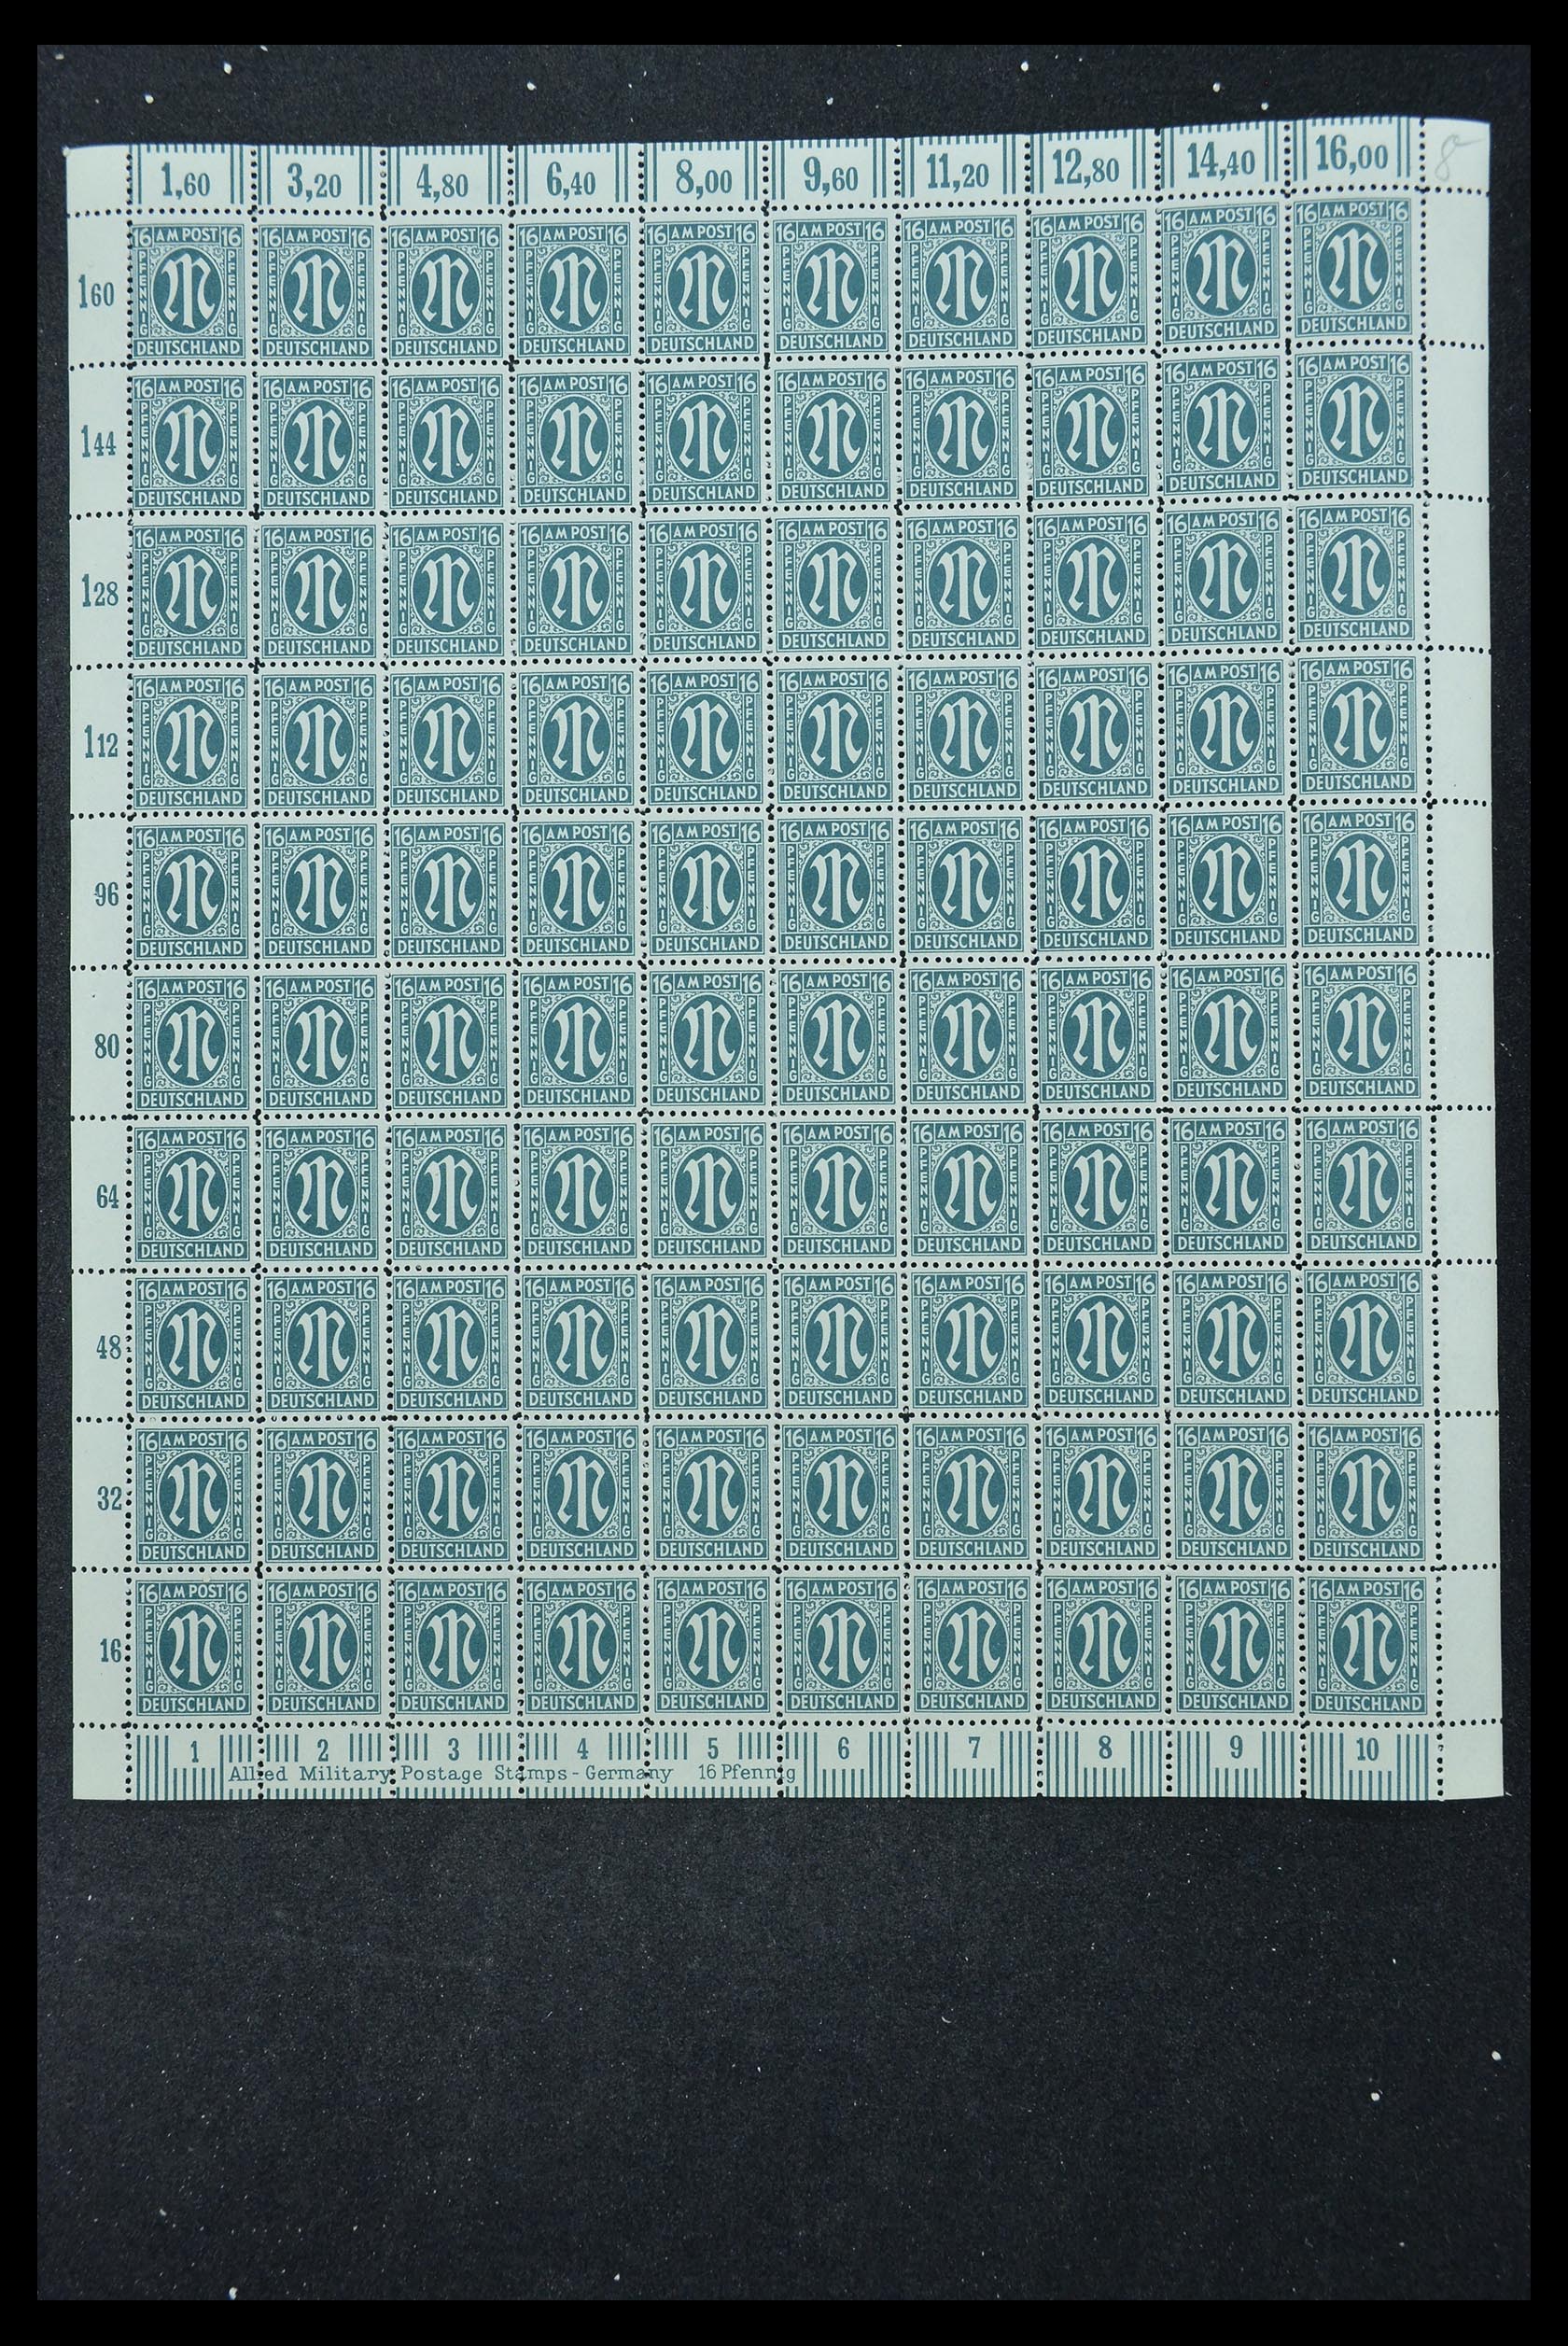 33144 317 - Stamp collection 33144 Germany British-American Zone 1945-1946.